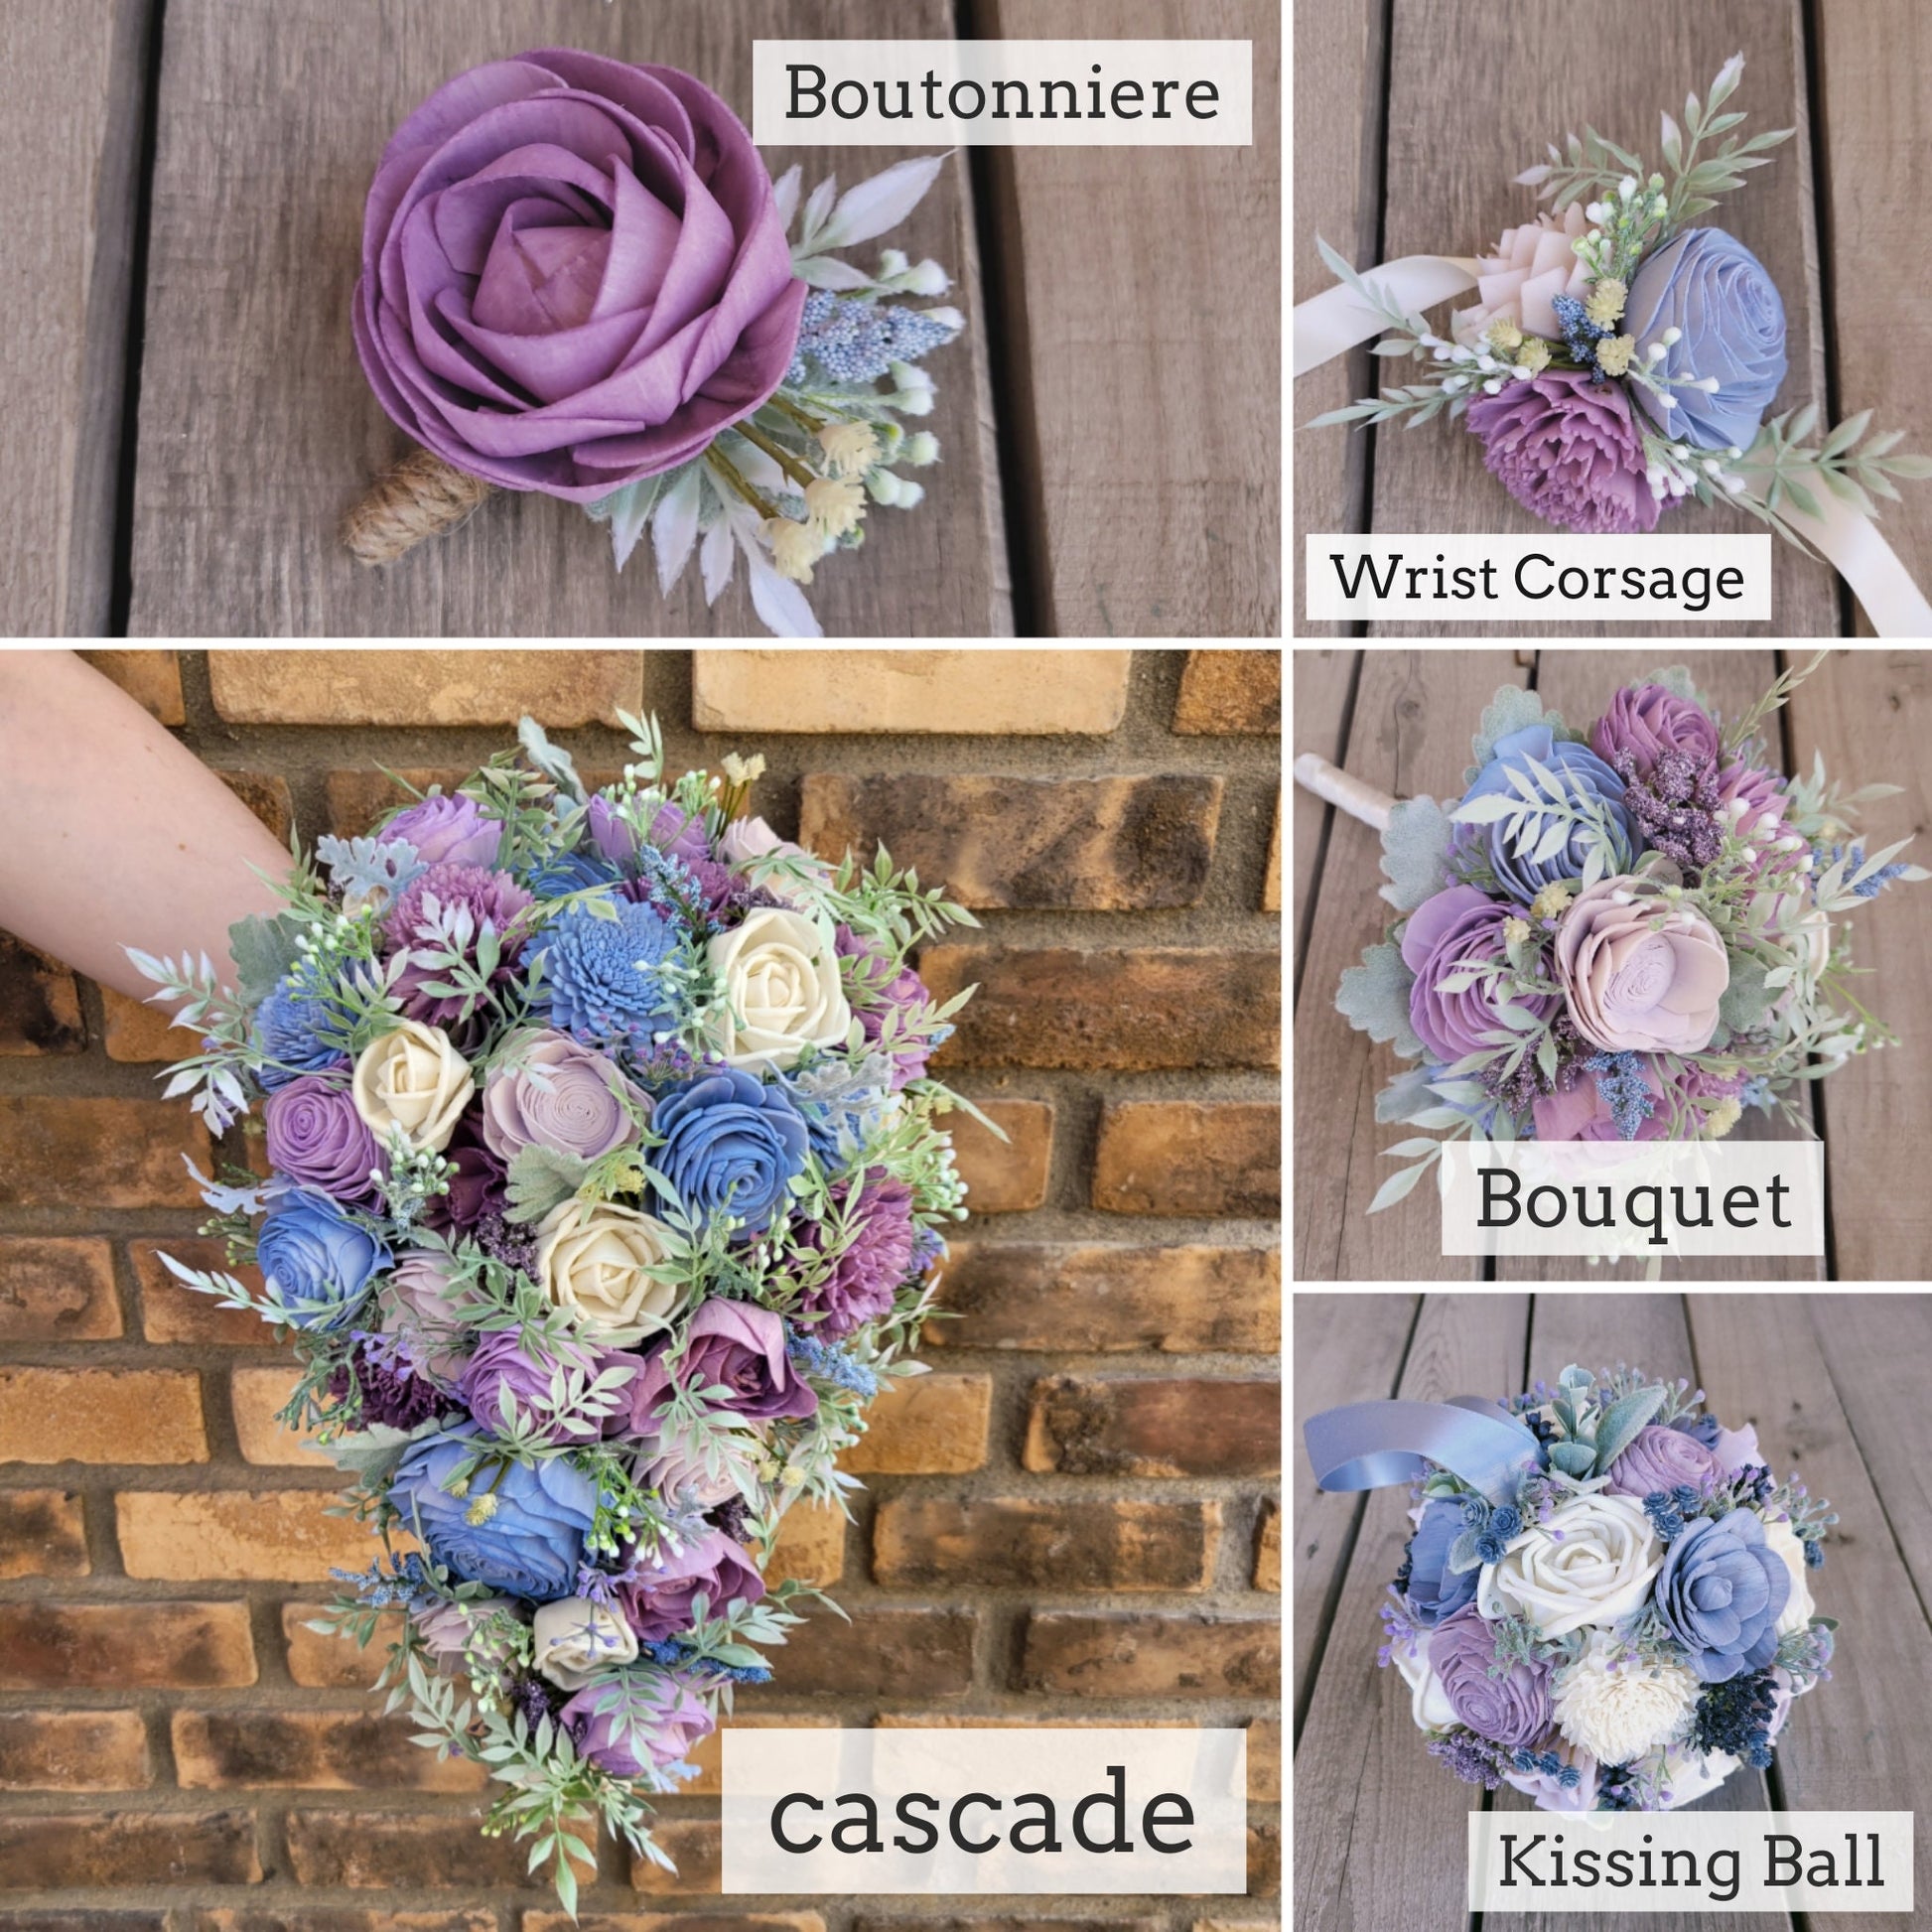 Lavender and Navy Wedding Bouquet, Sola Wood Flower Bouquet, Artificial Flower Bouquet, Wedding Decor